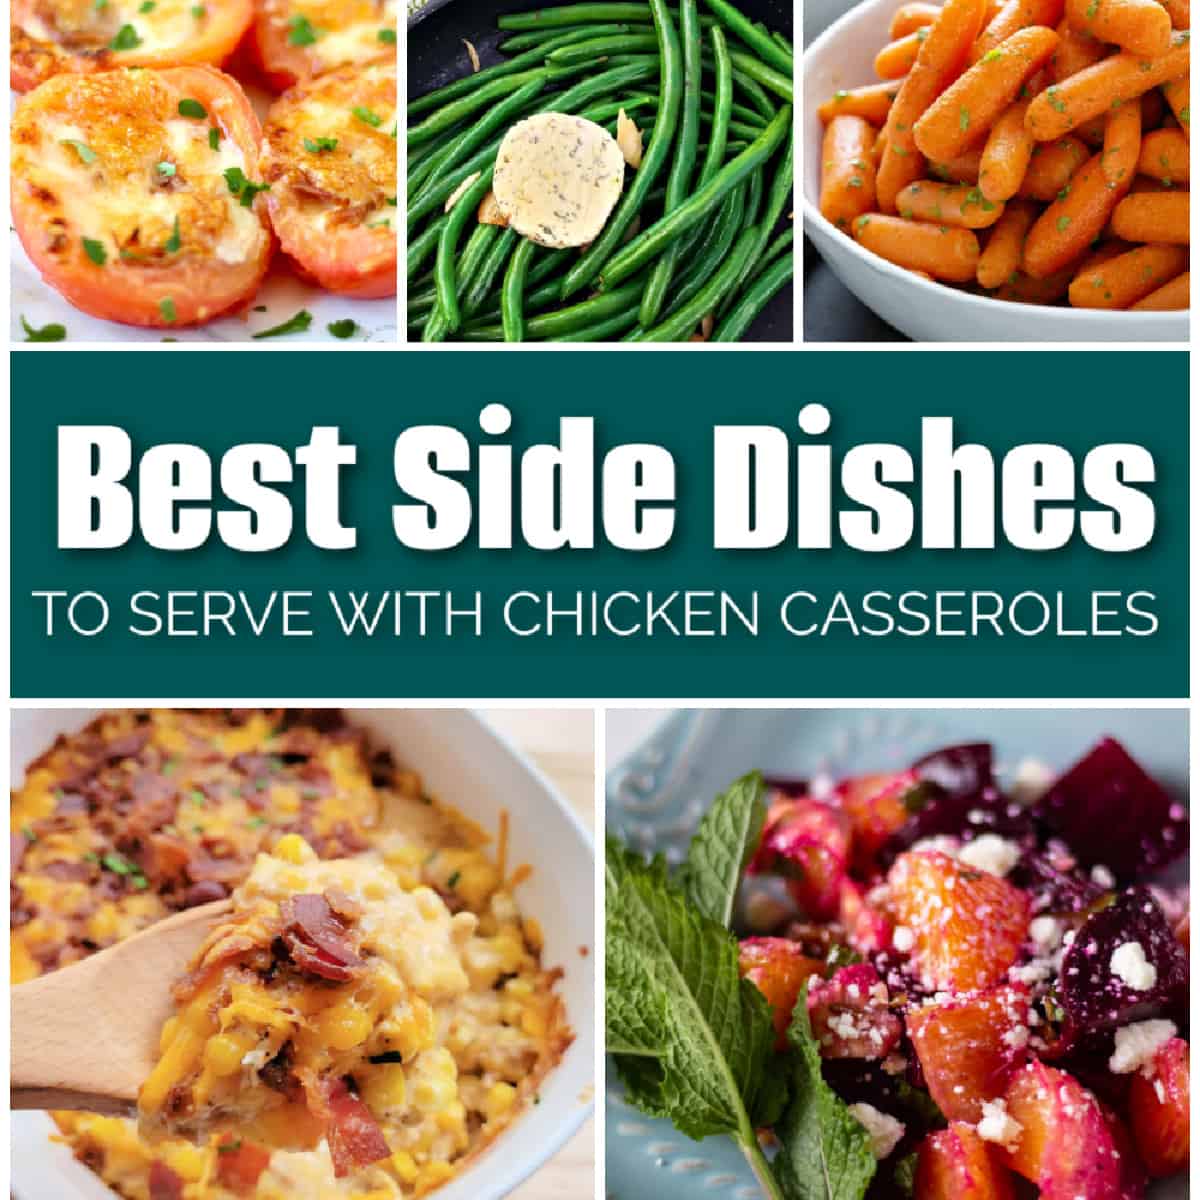 Collage image of Best Side Dishes for Chicken Casseroles with text overlay.